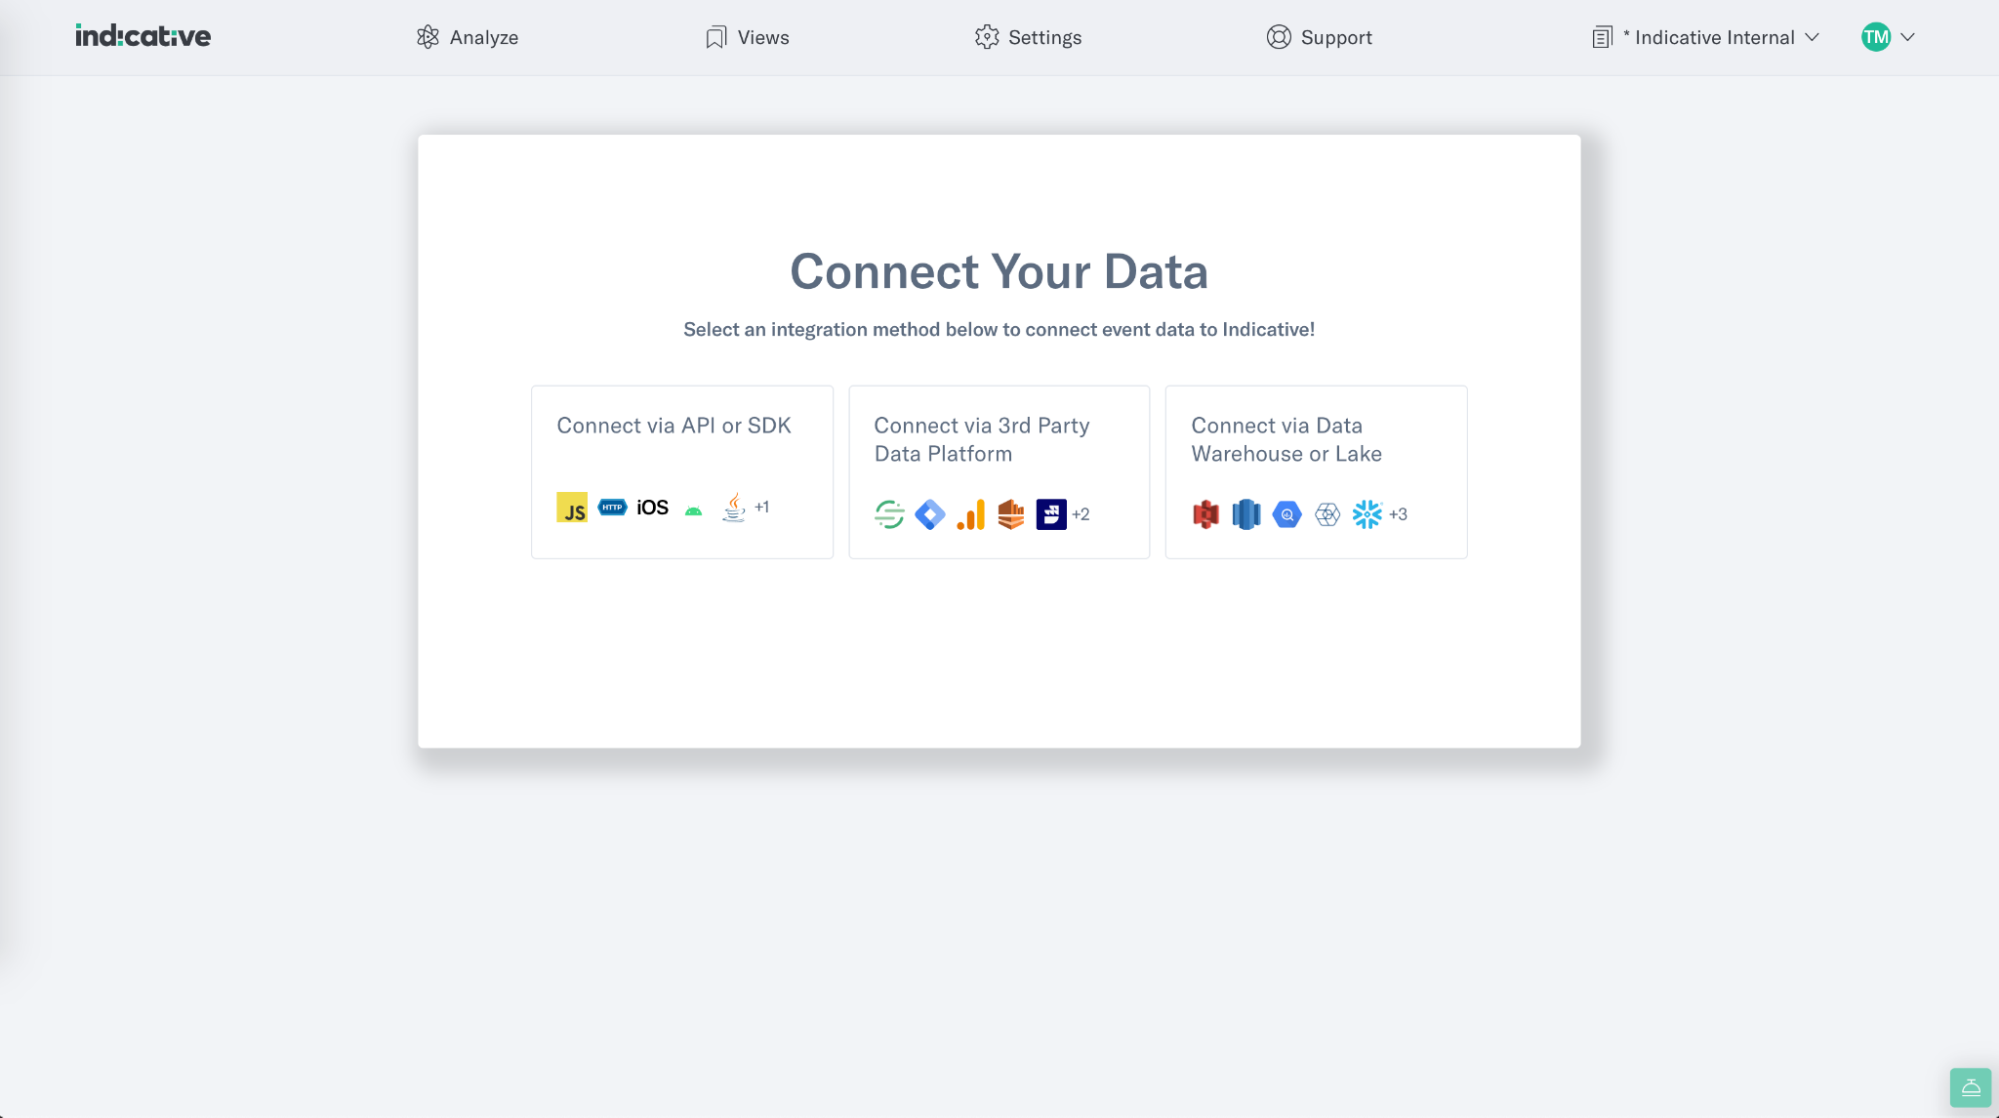 Connect data sources dashboard in Indicative